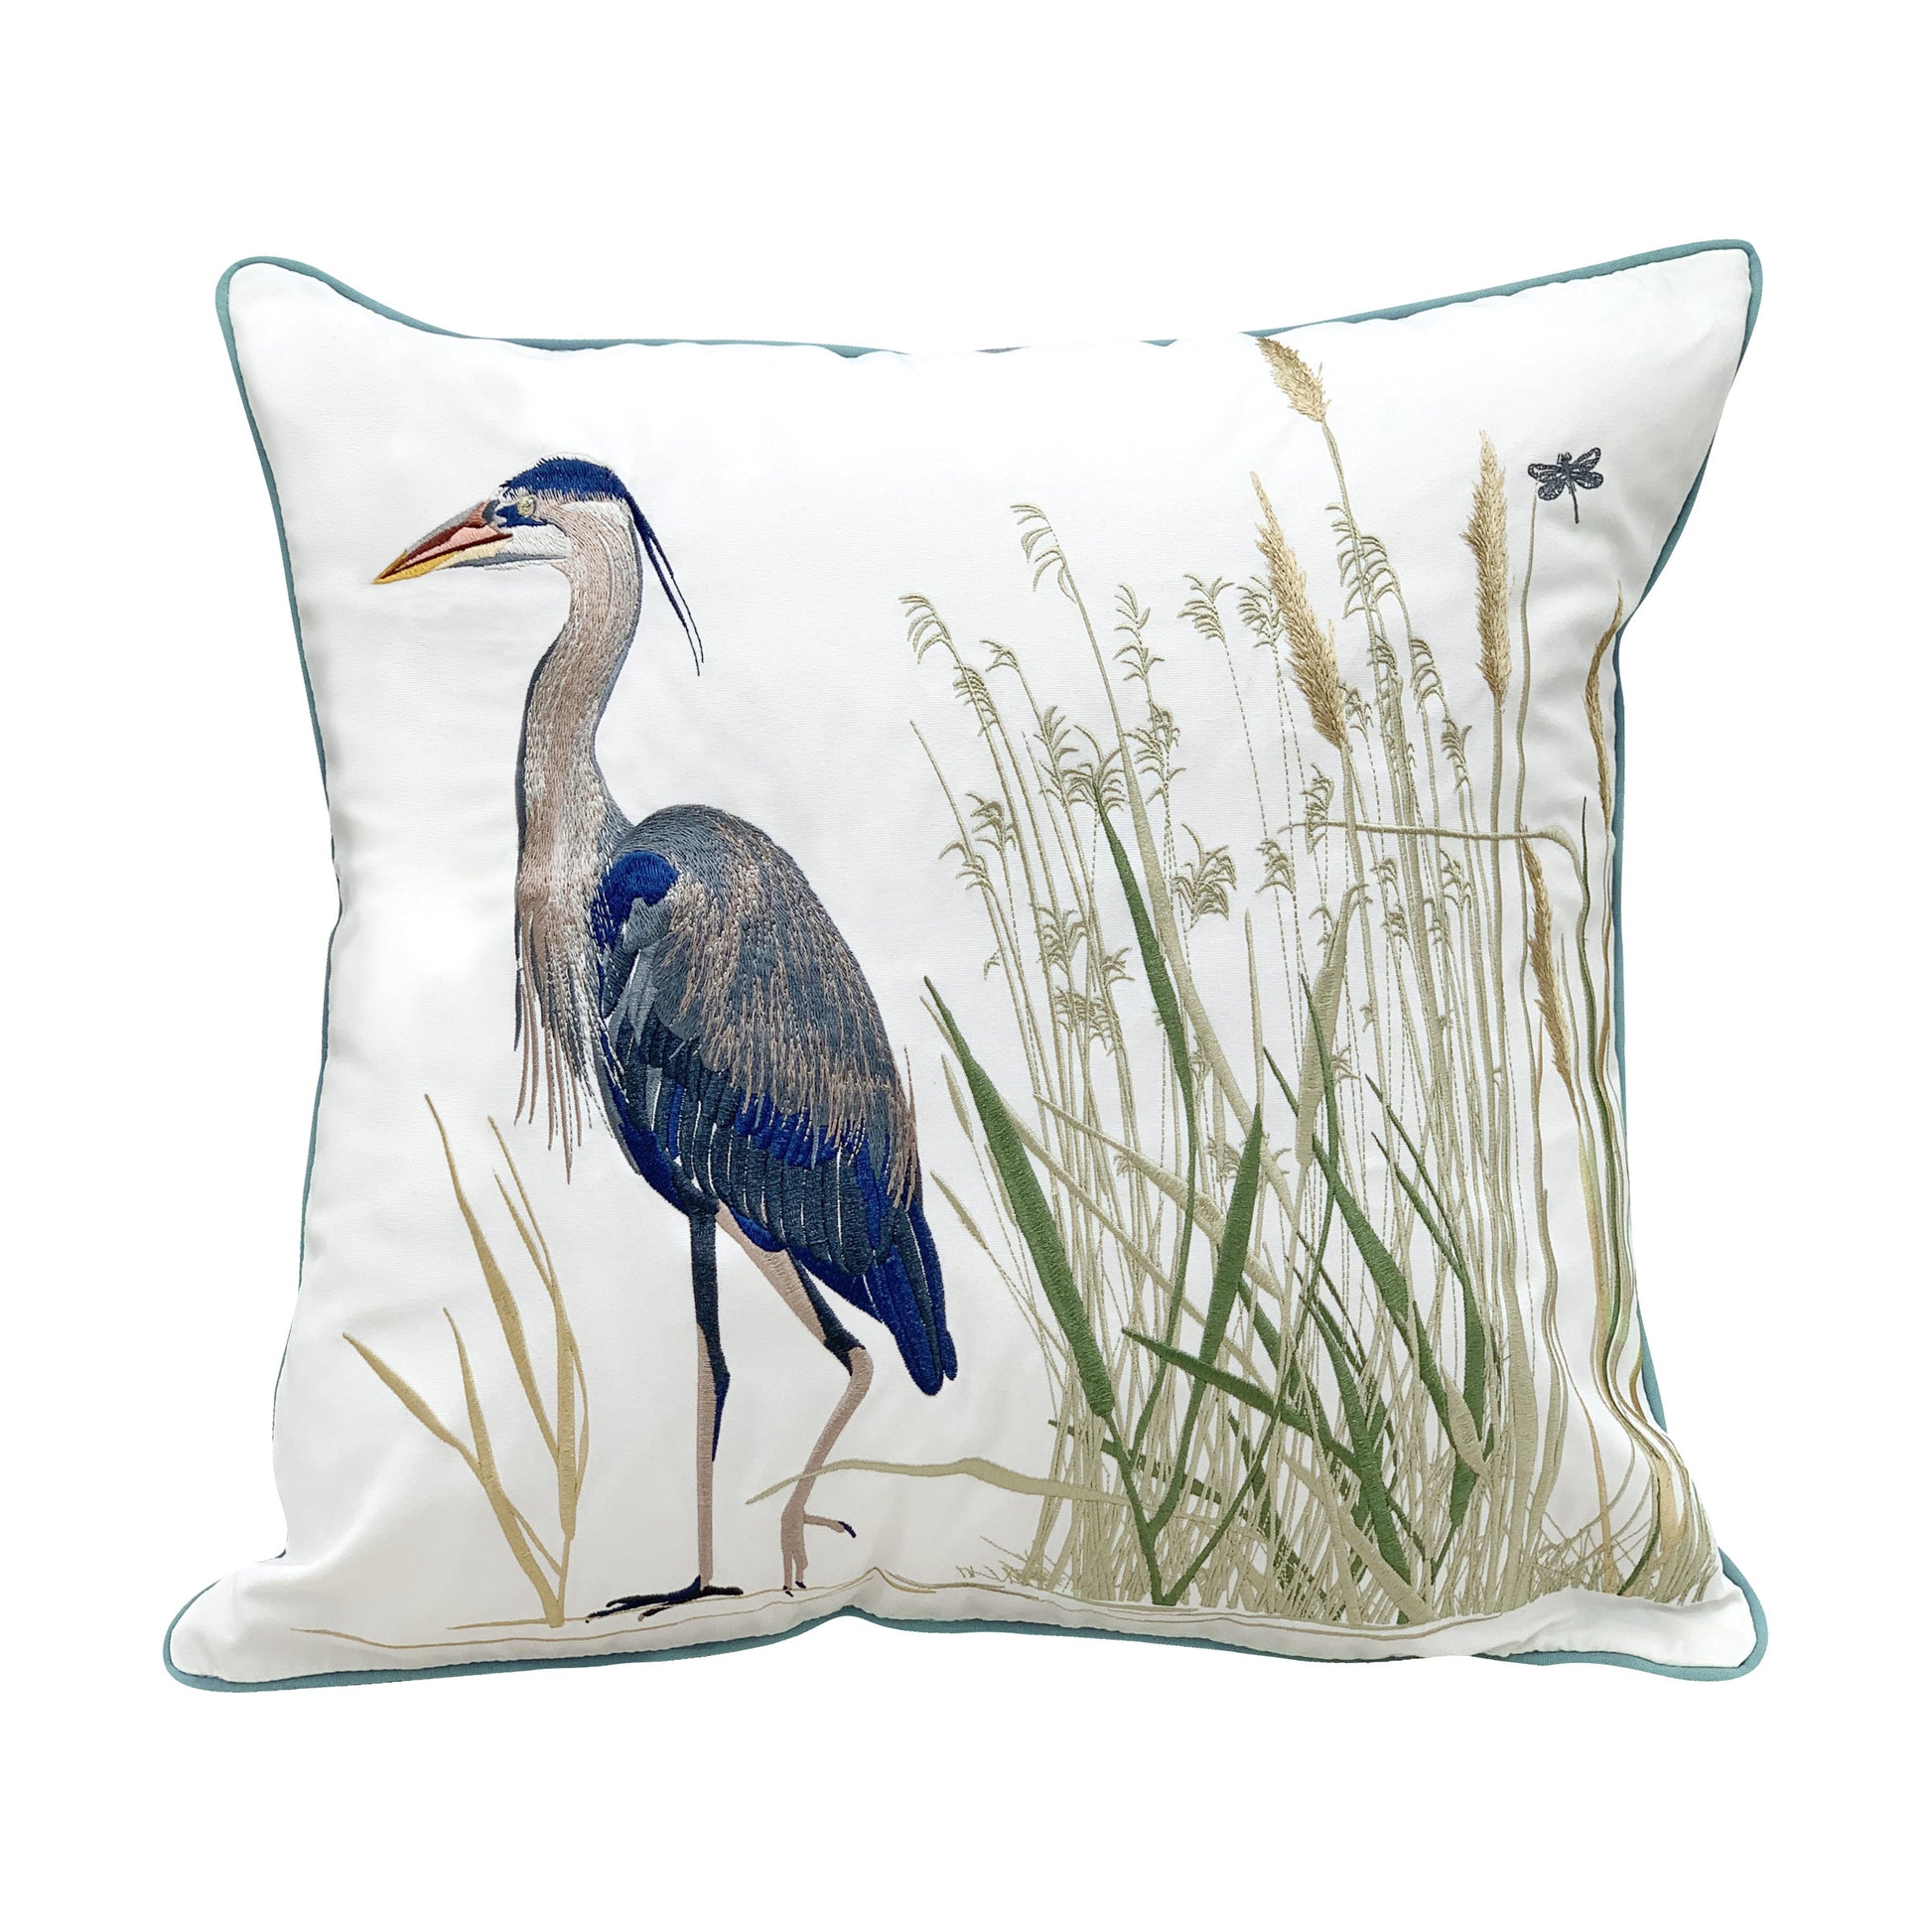 A large blue heron walking through marsh and cattails. Embroidered on a white ground outdoor pillow with blue edge piping.